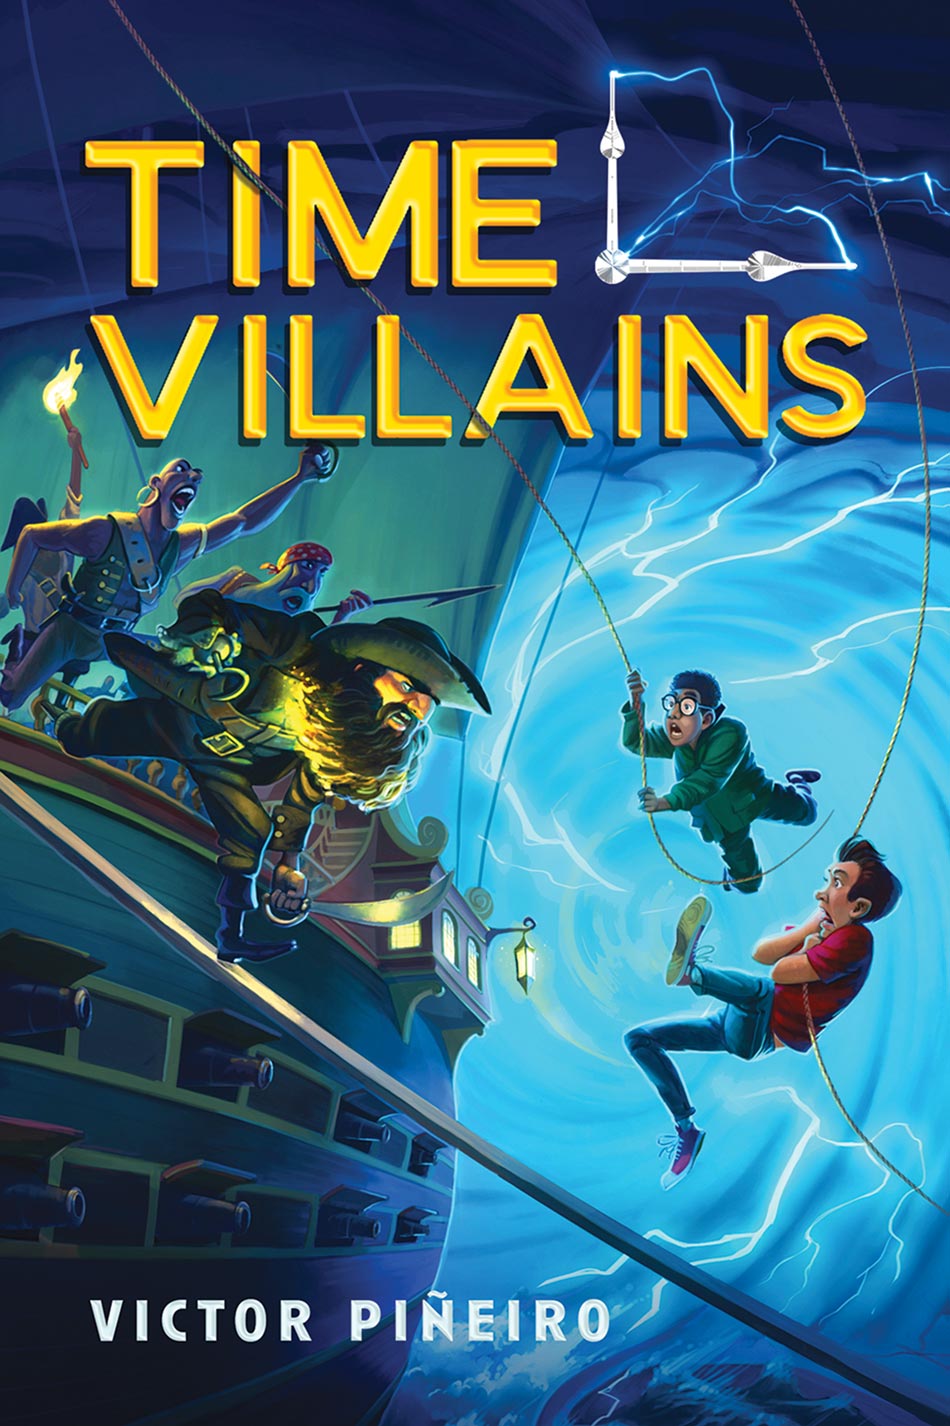 The cover of Piñeiro's Time Villains features two kids using ropes to swing themselves towards a ship, filled with ferocious pirates, against a swirling blue background.